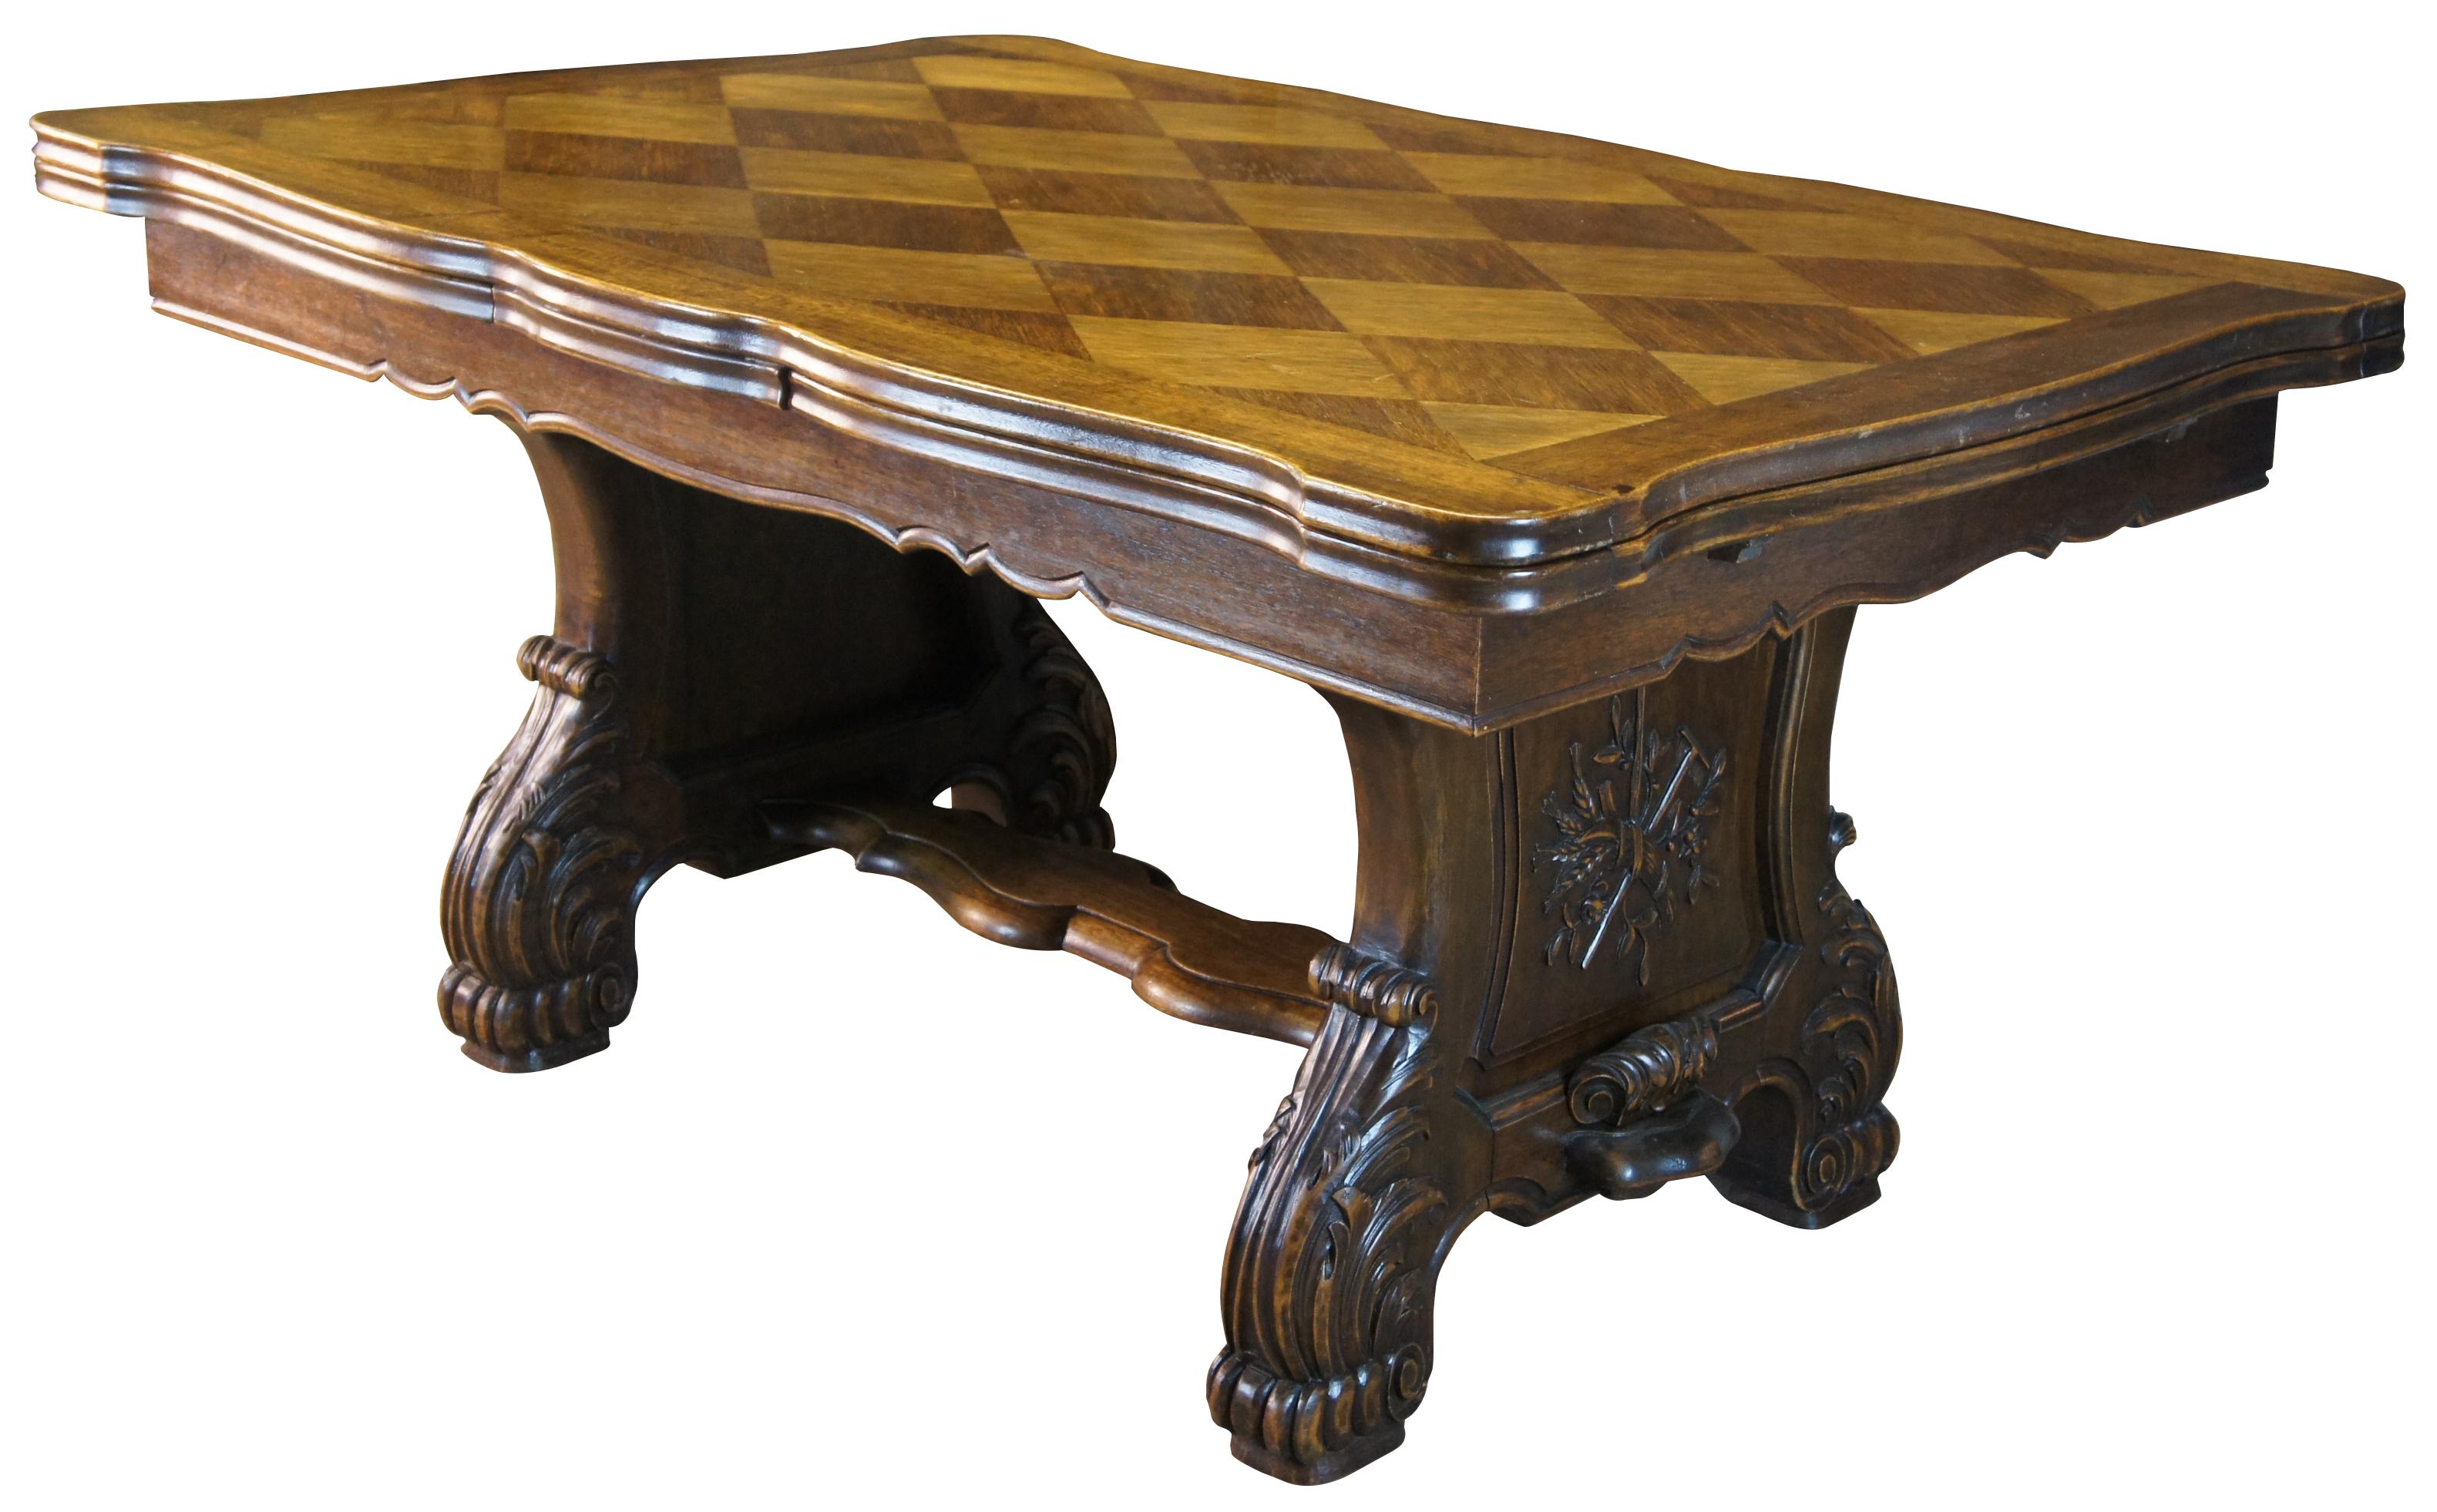 Antique French walnut Draw Leaf extension dining table. Features a stunning diamond inlay parquetry top with serpentine shape. The table is supported by a rectangular apron with matching cut to top and trestle base. The table base includes paneled